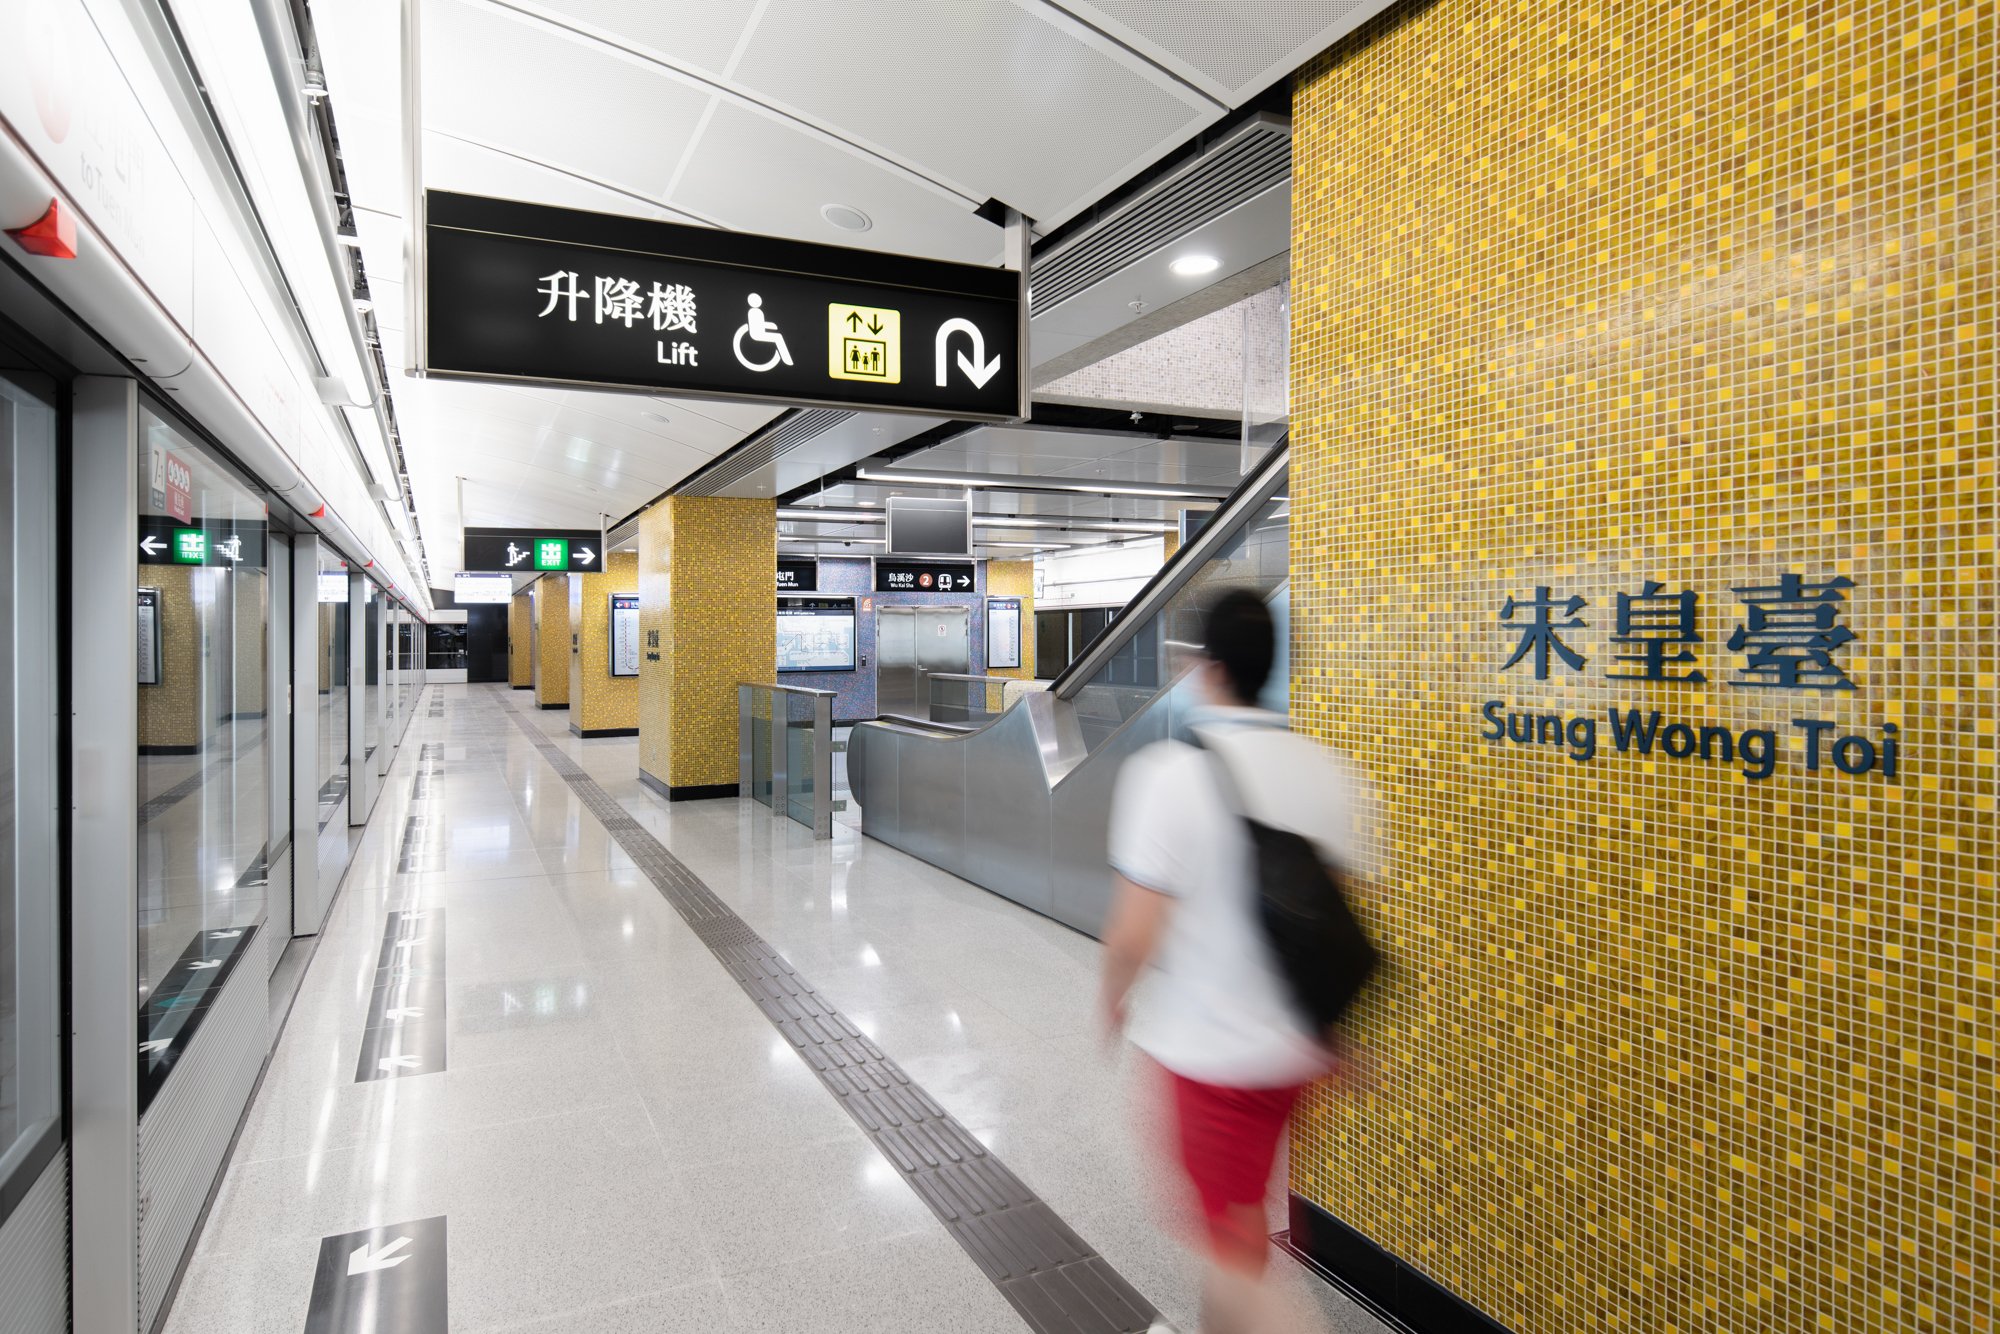  Tuen Ma Line 2021 Sung Wong Toi MTR Station  Designed by / Photographed for Farrells 